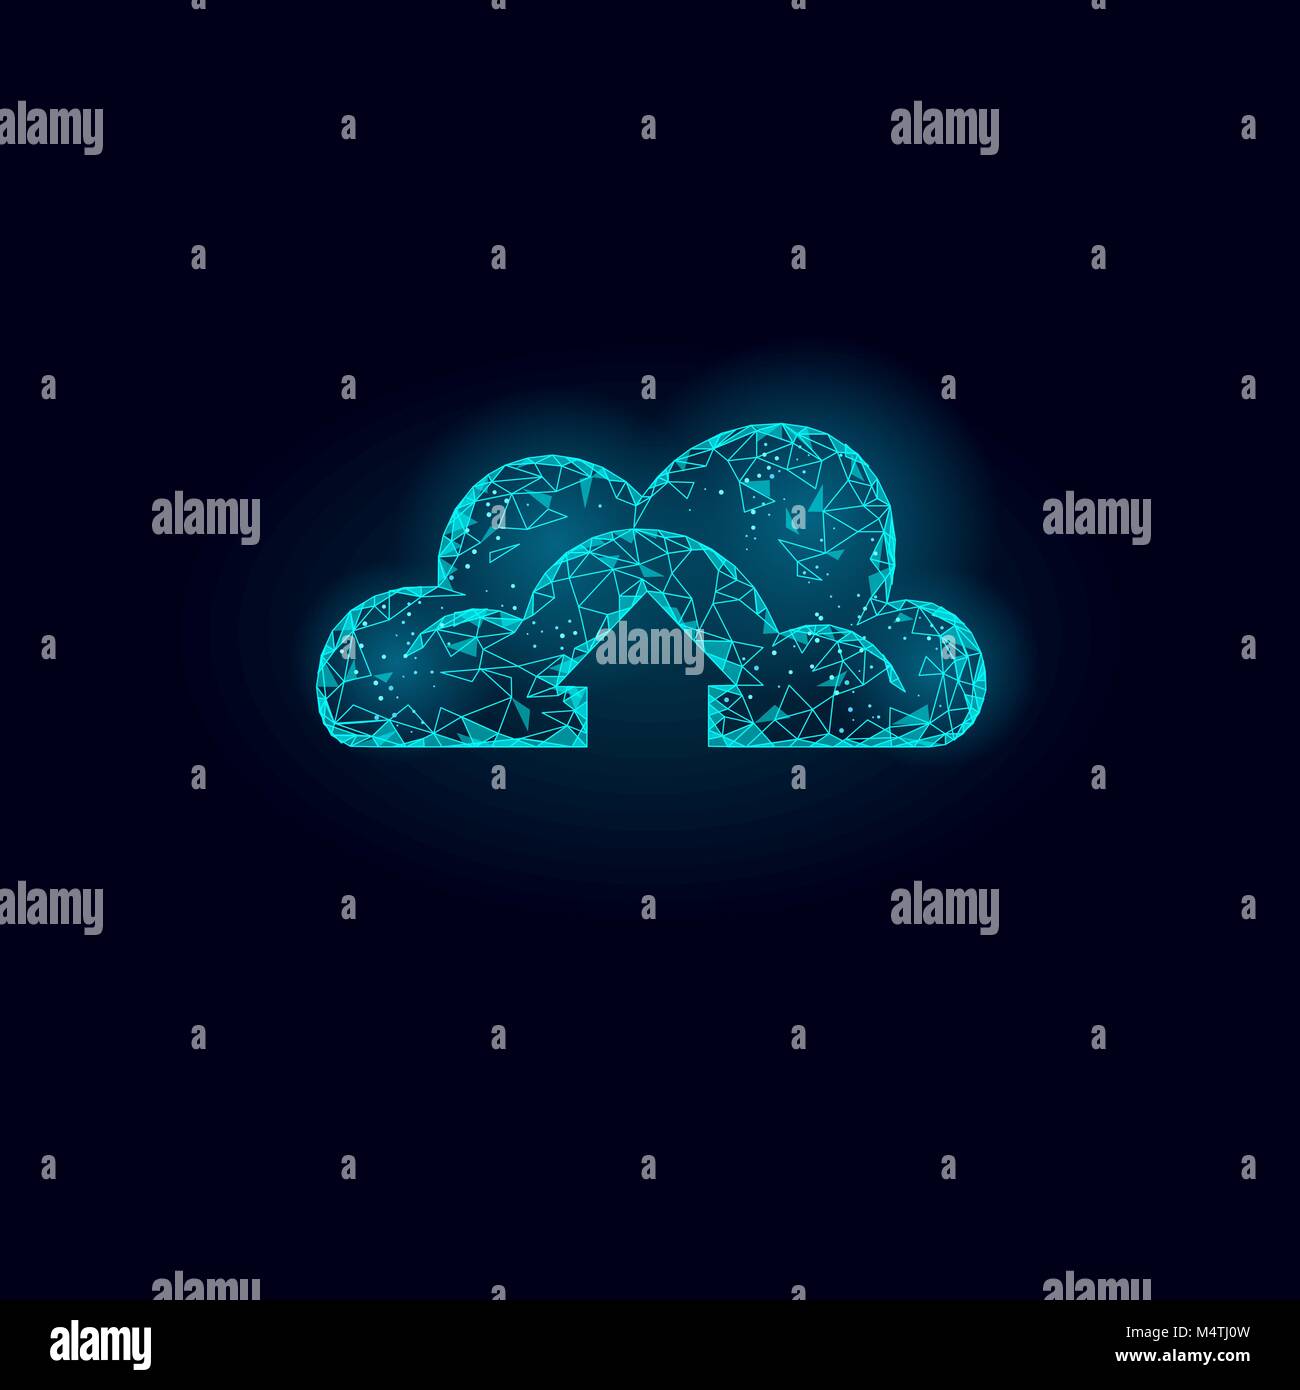 Cloud computing online storage low poly. Polygonal future modern internet business technology. Blue glowing global data information exchange available background vector illustration Stock Vector